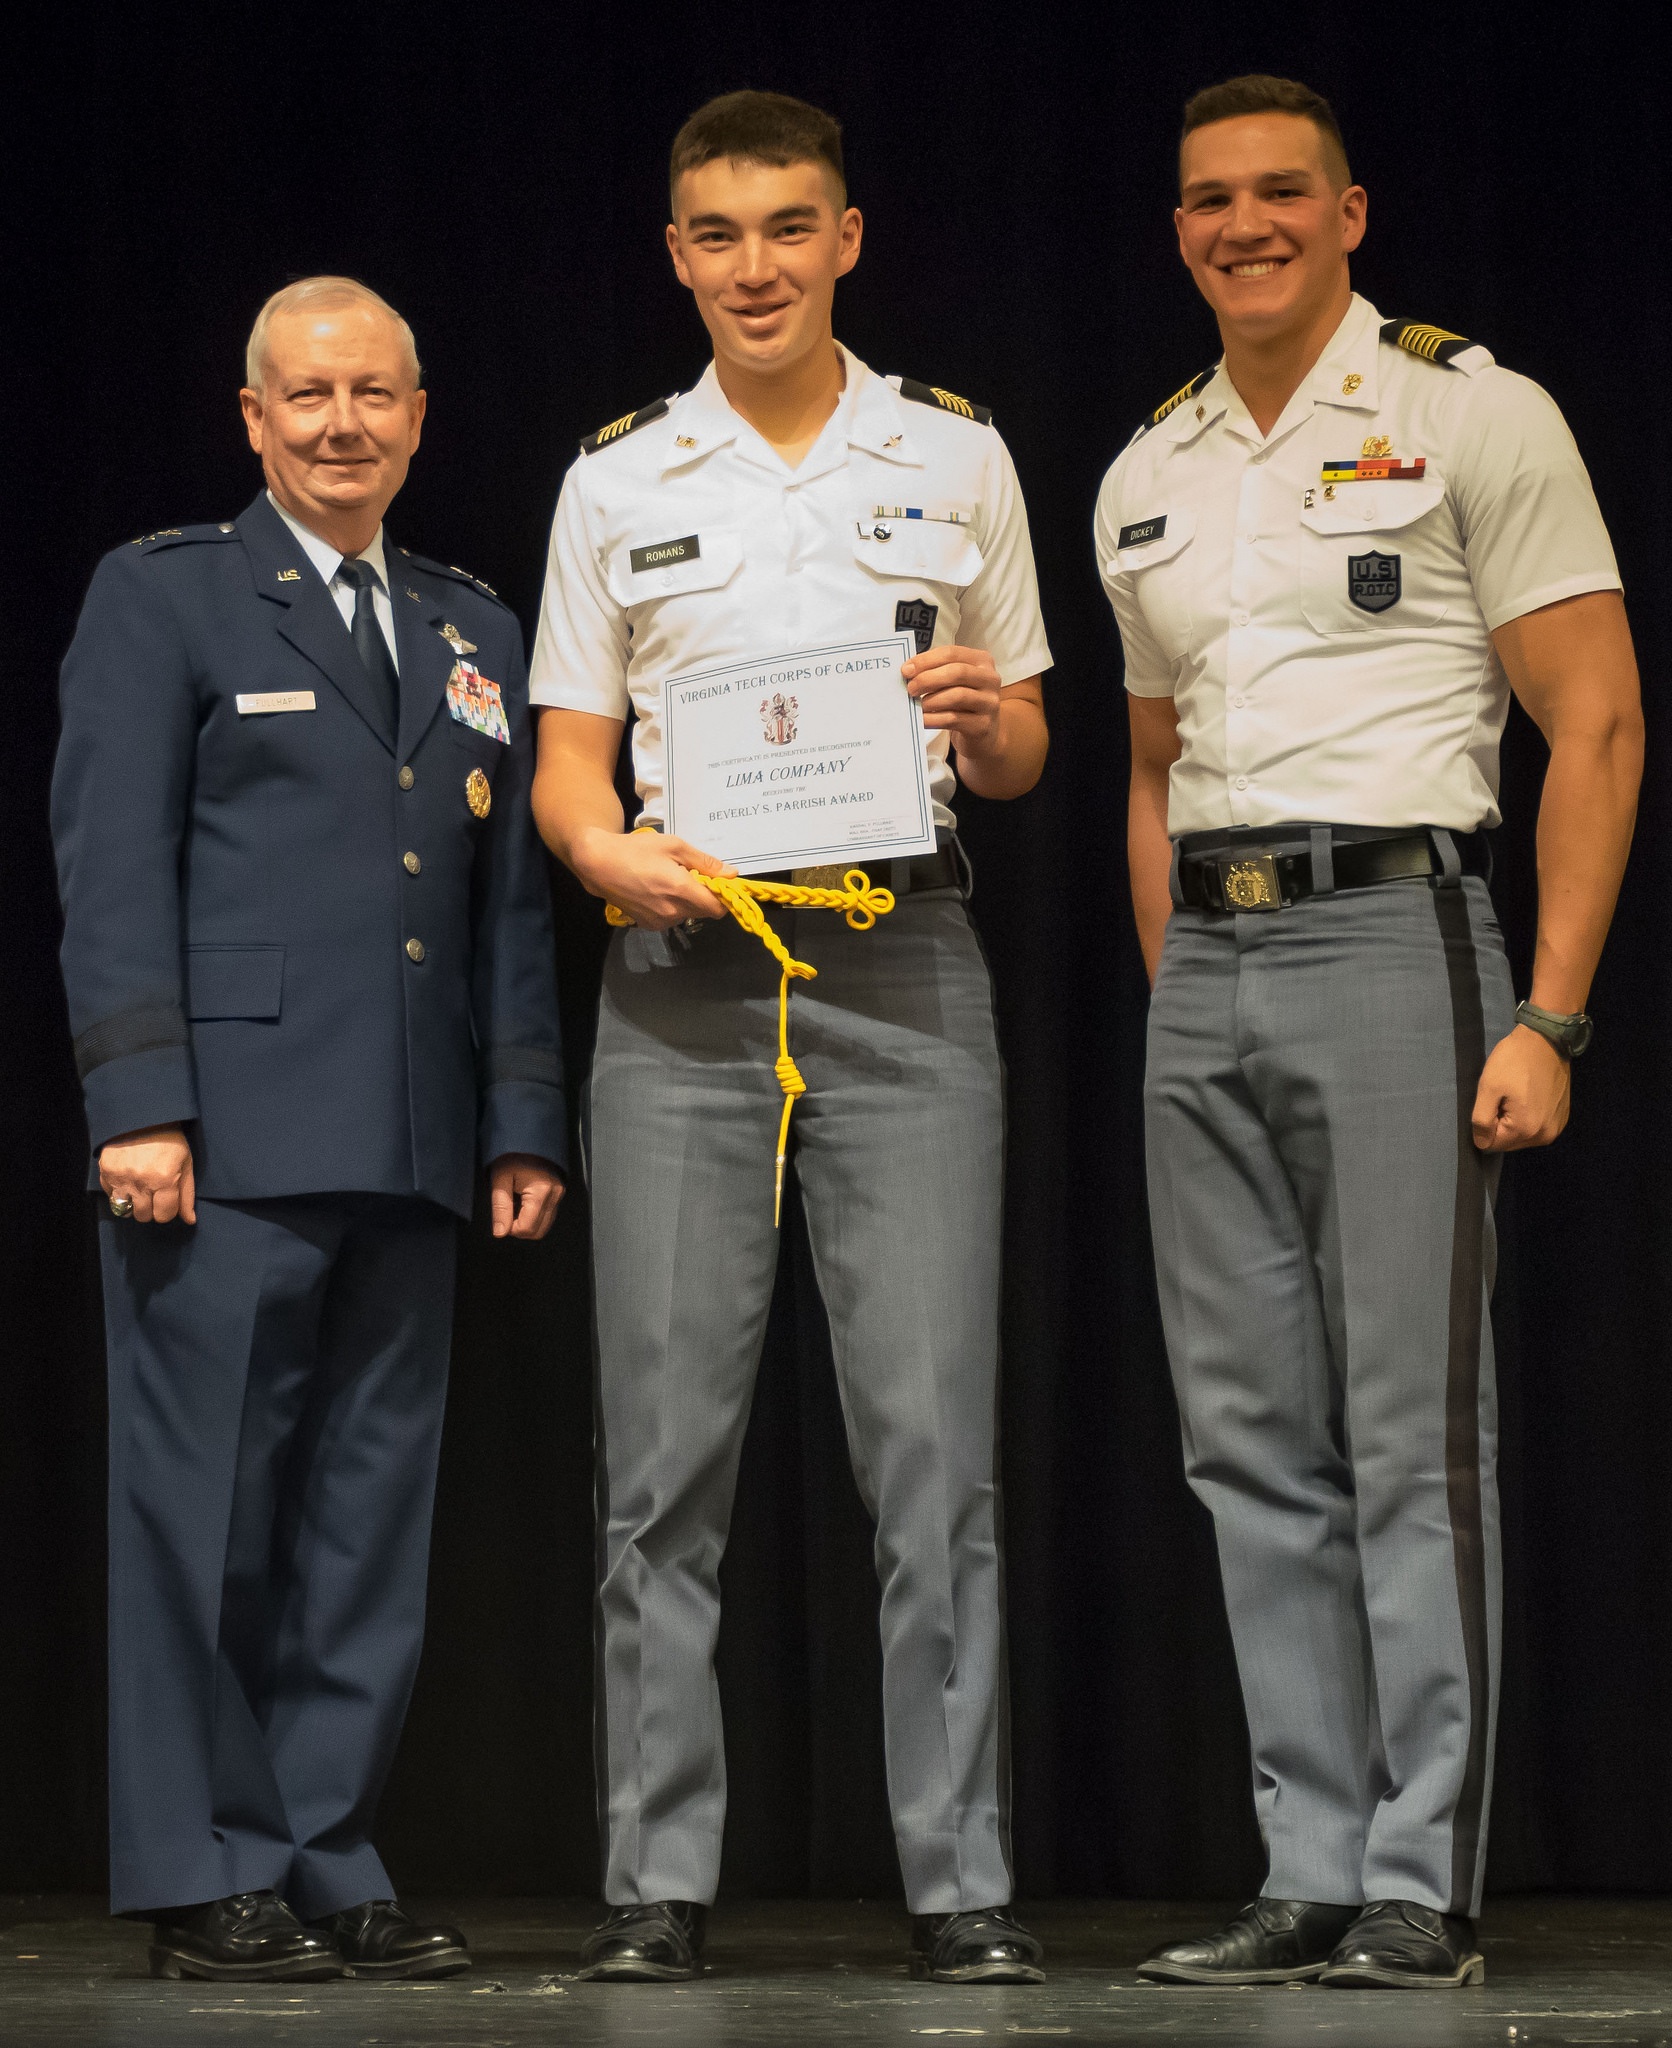 Cadet Stephen Romans (center) accepts the Gold Cord from the Commandant of Cadets Maj. Gen. Randal Fullhart (left) and the Regimental Commander Cadet Col. Austin Dickey (right) on the Burruss Hall auditorium stage.